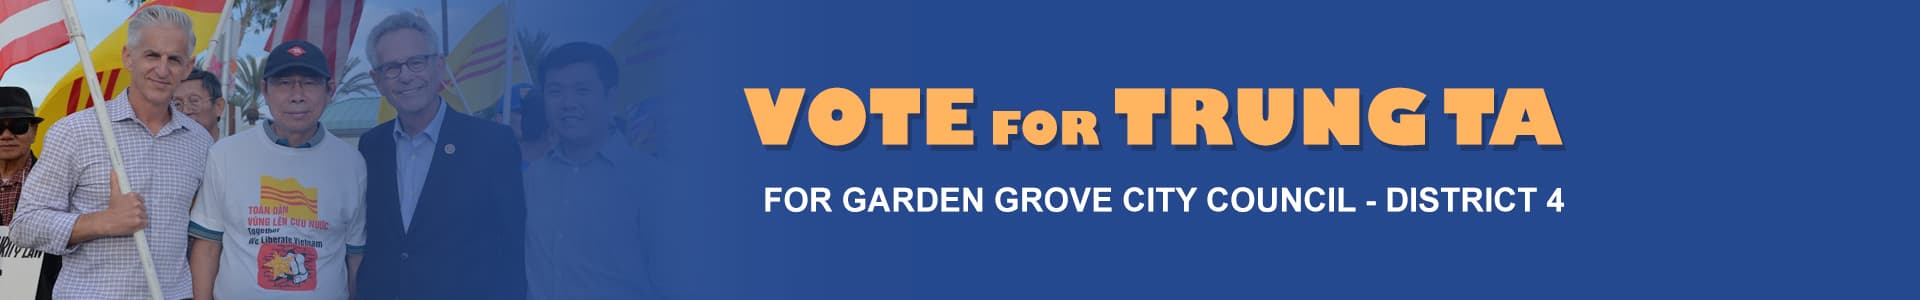 Vote for Trung Ta  -  for garden grove city council - district 4